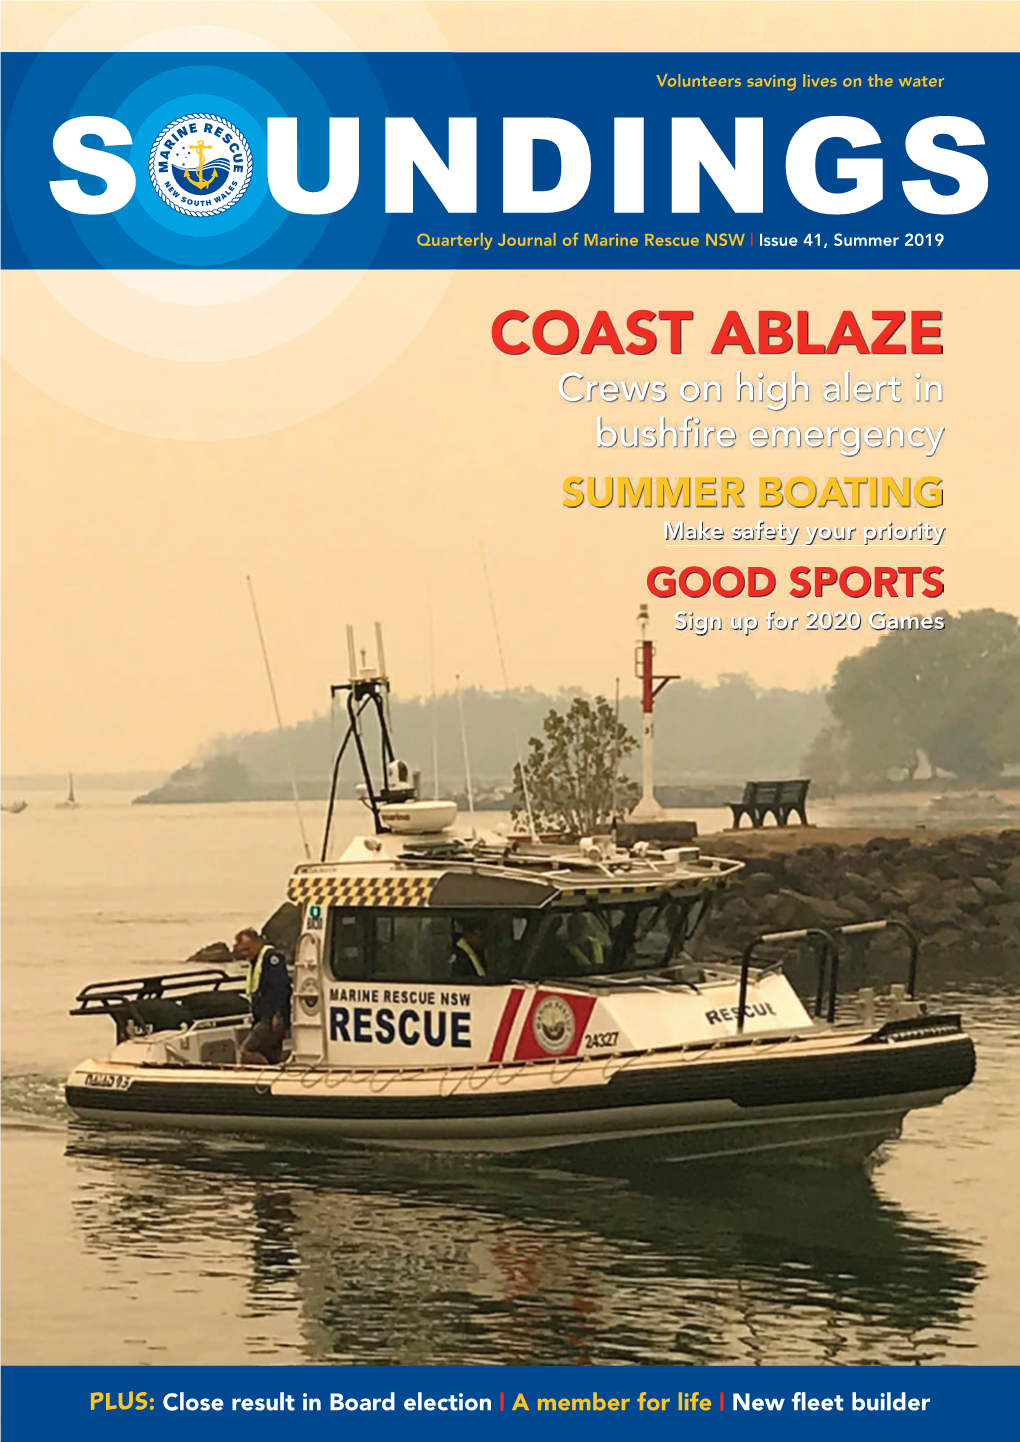 COAST ABLAZE Crews on High Alert in Bushfire Emergency SUMMER BOATING Make Safety Your Priority GOOD SPORTS Sign up for 2020 Games